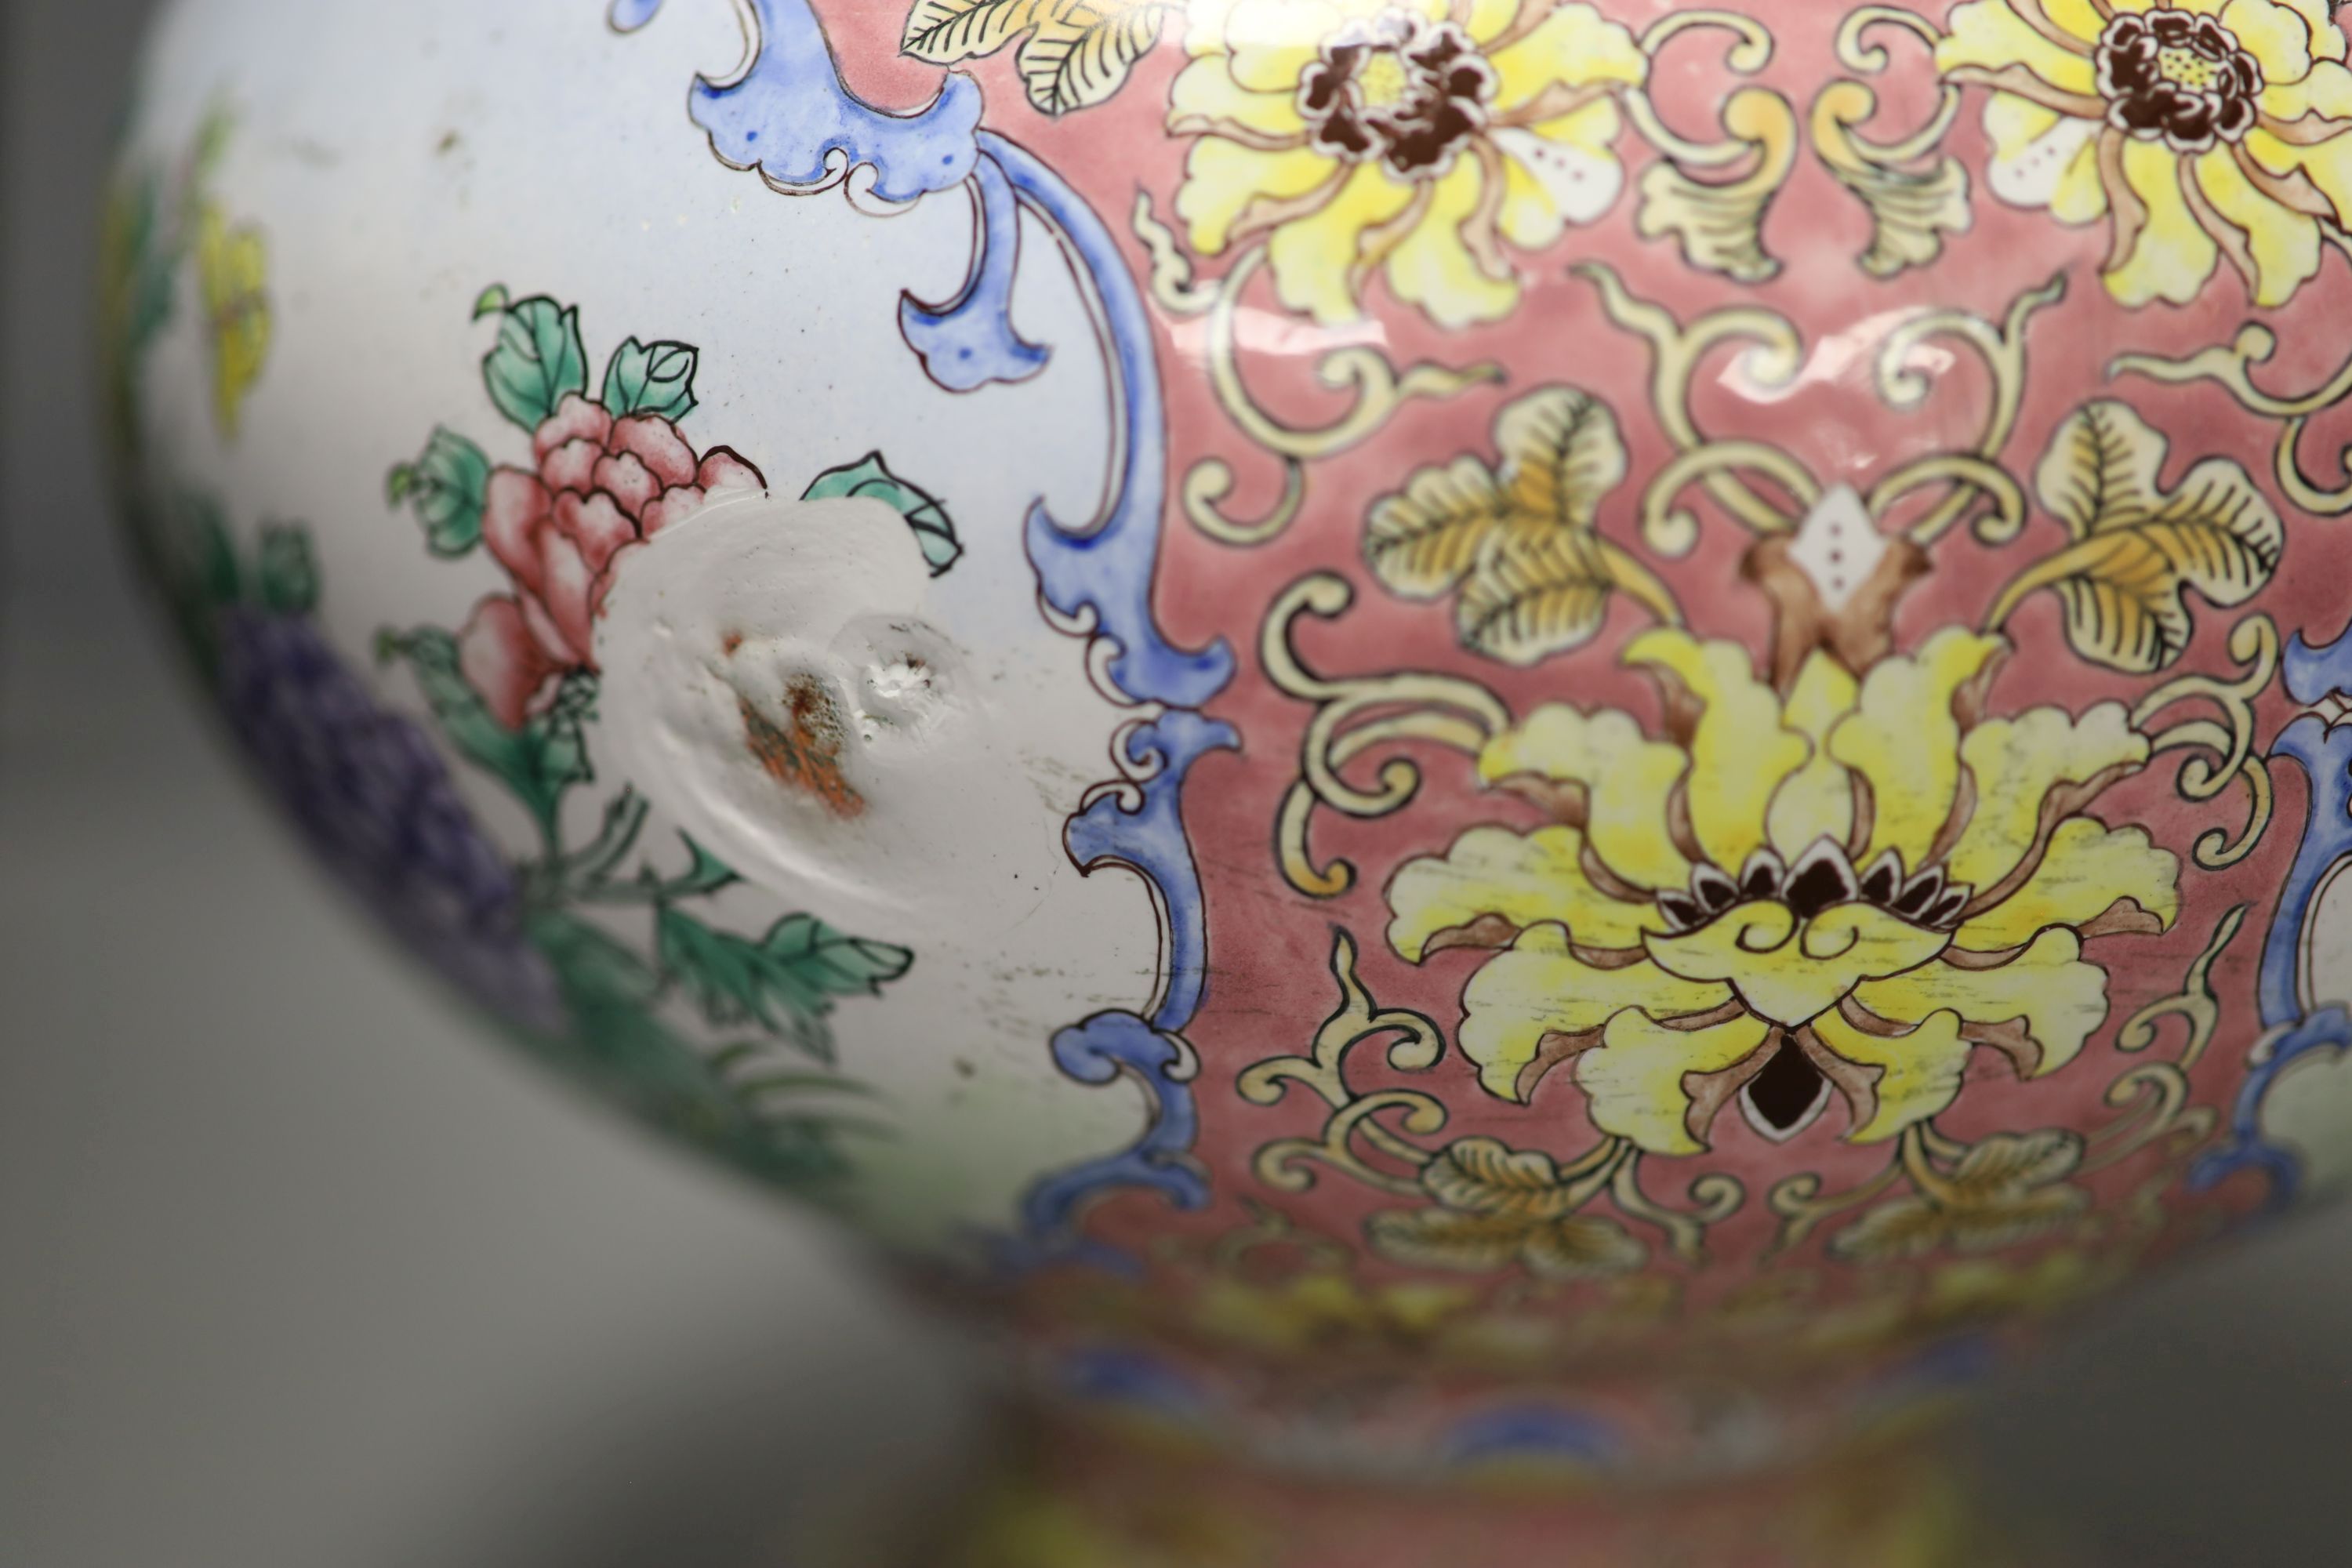 A pair of Chinese canton enamel vases, height 47cm